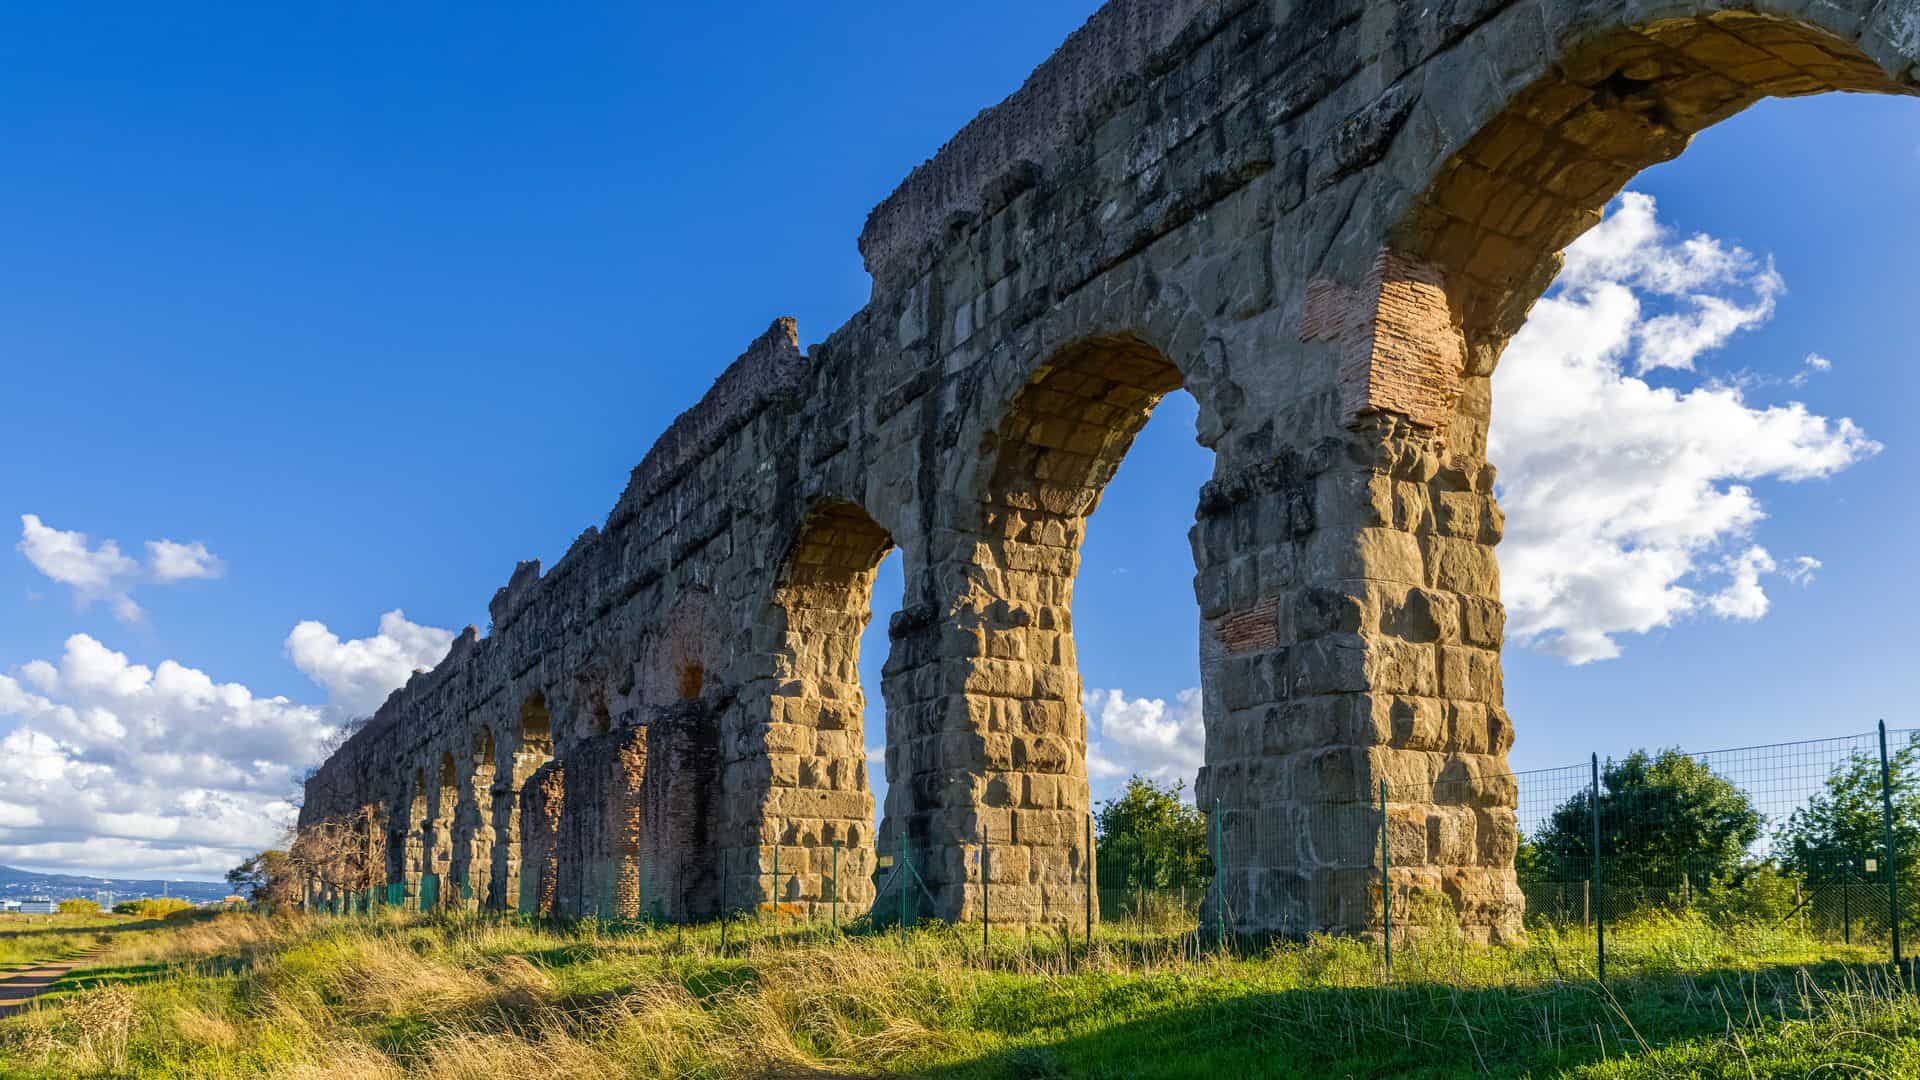 A view of an ancient aqueduct in a park in Rome.